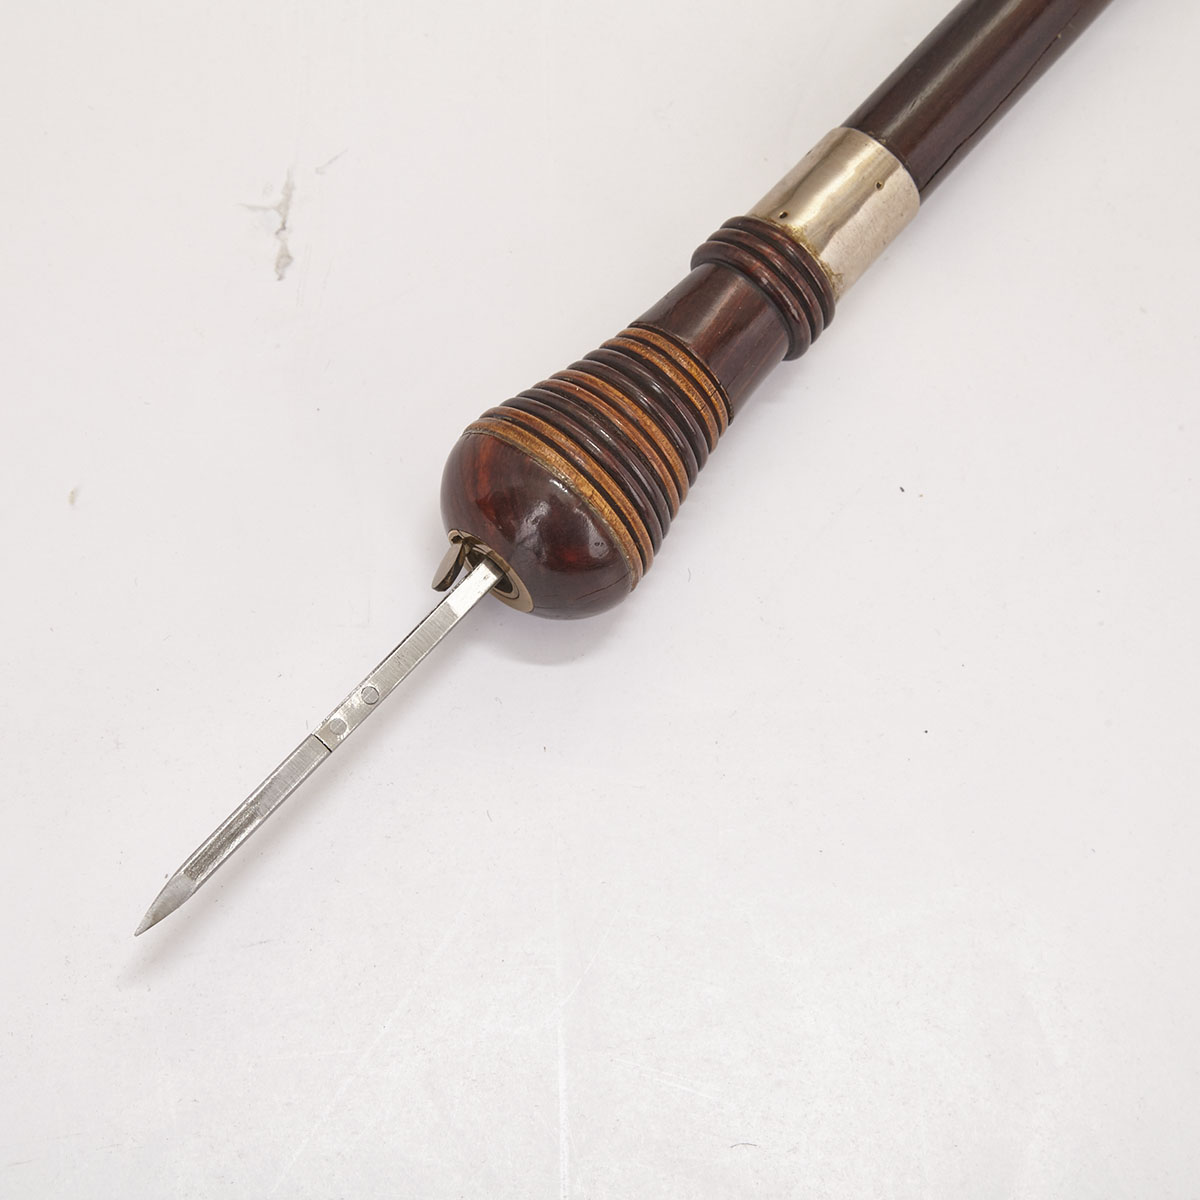 Edwardian Rosewood and Specimen Wood Stiletto Dagger Gadget Cane, early 20th century